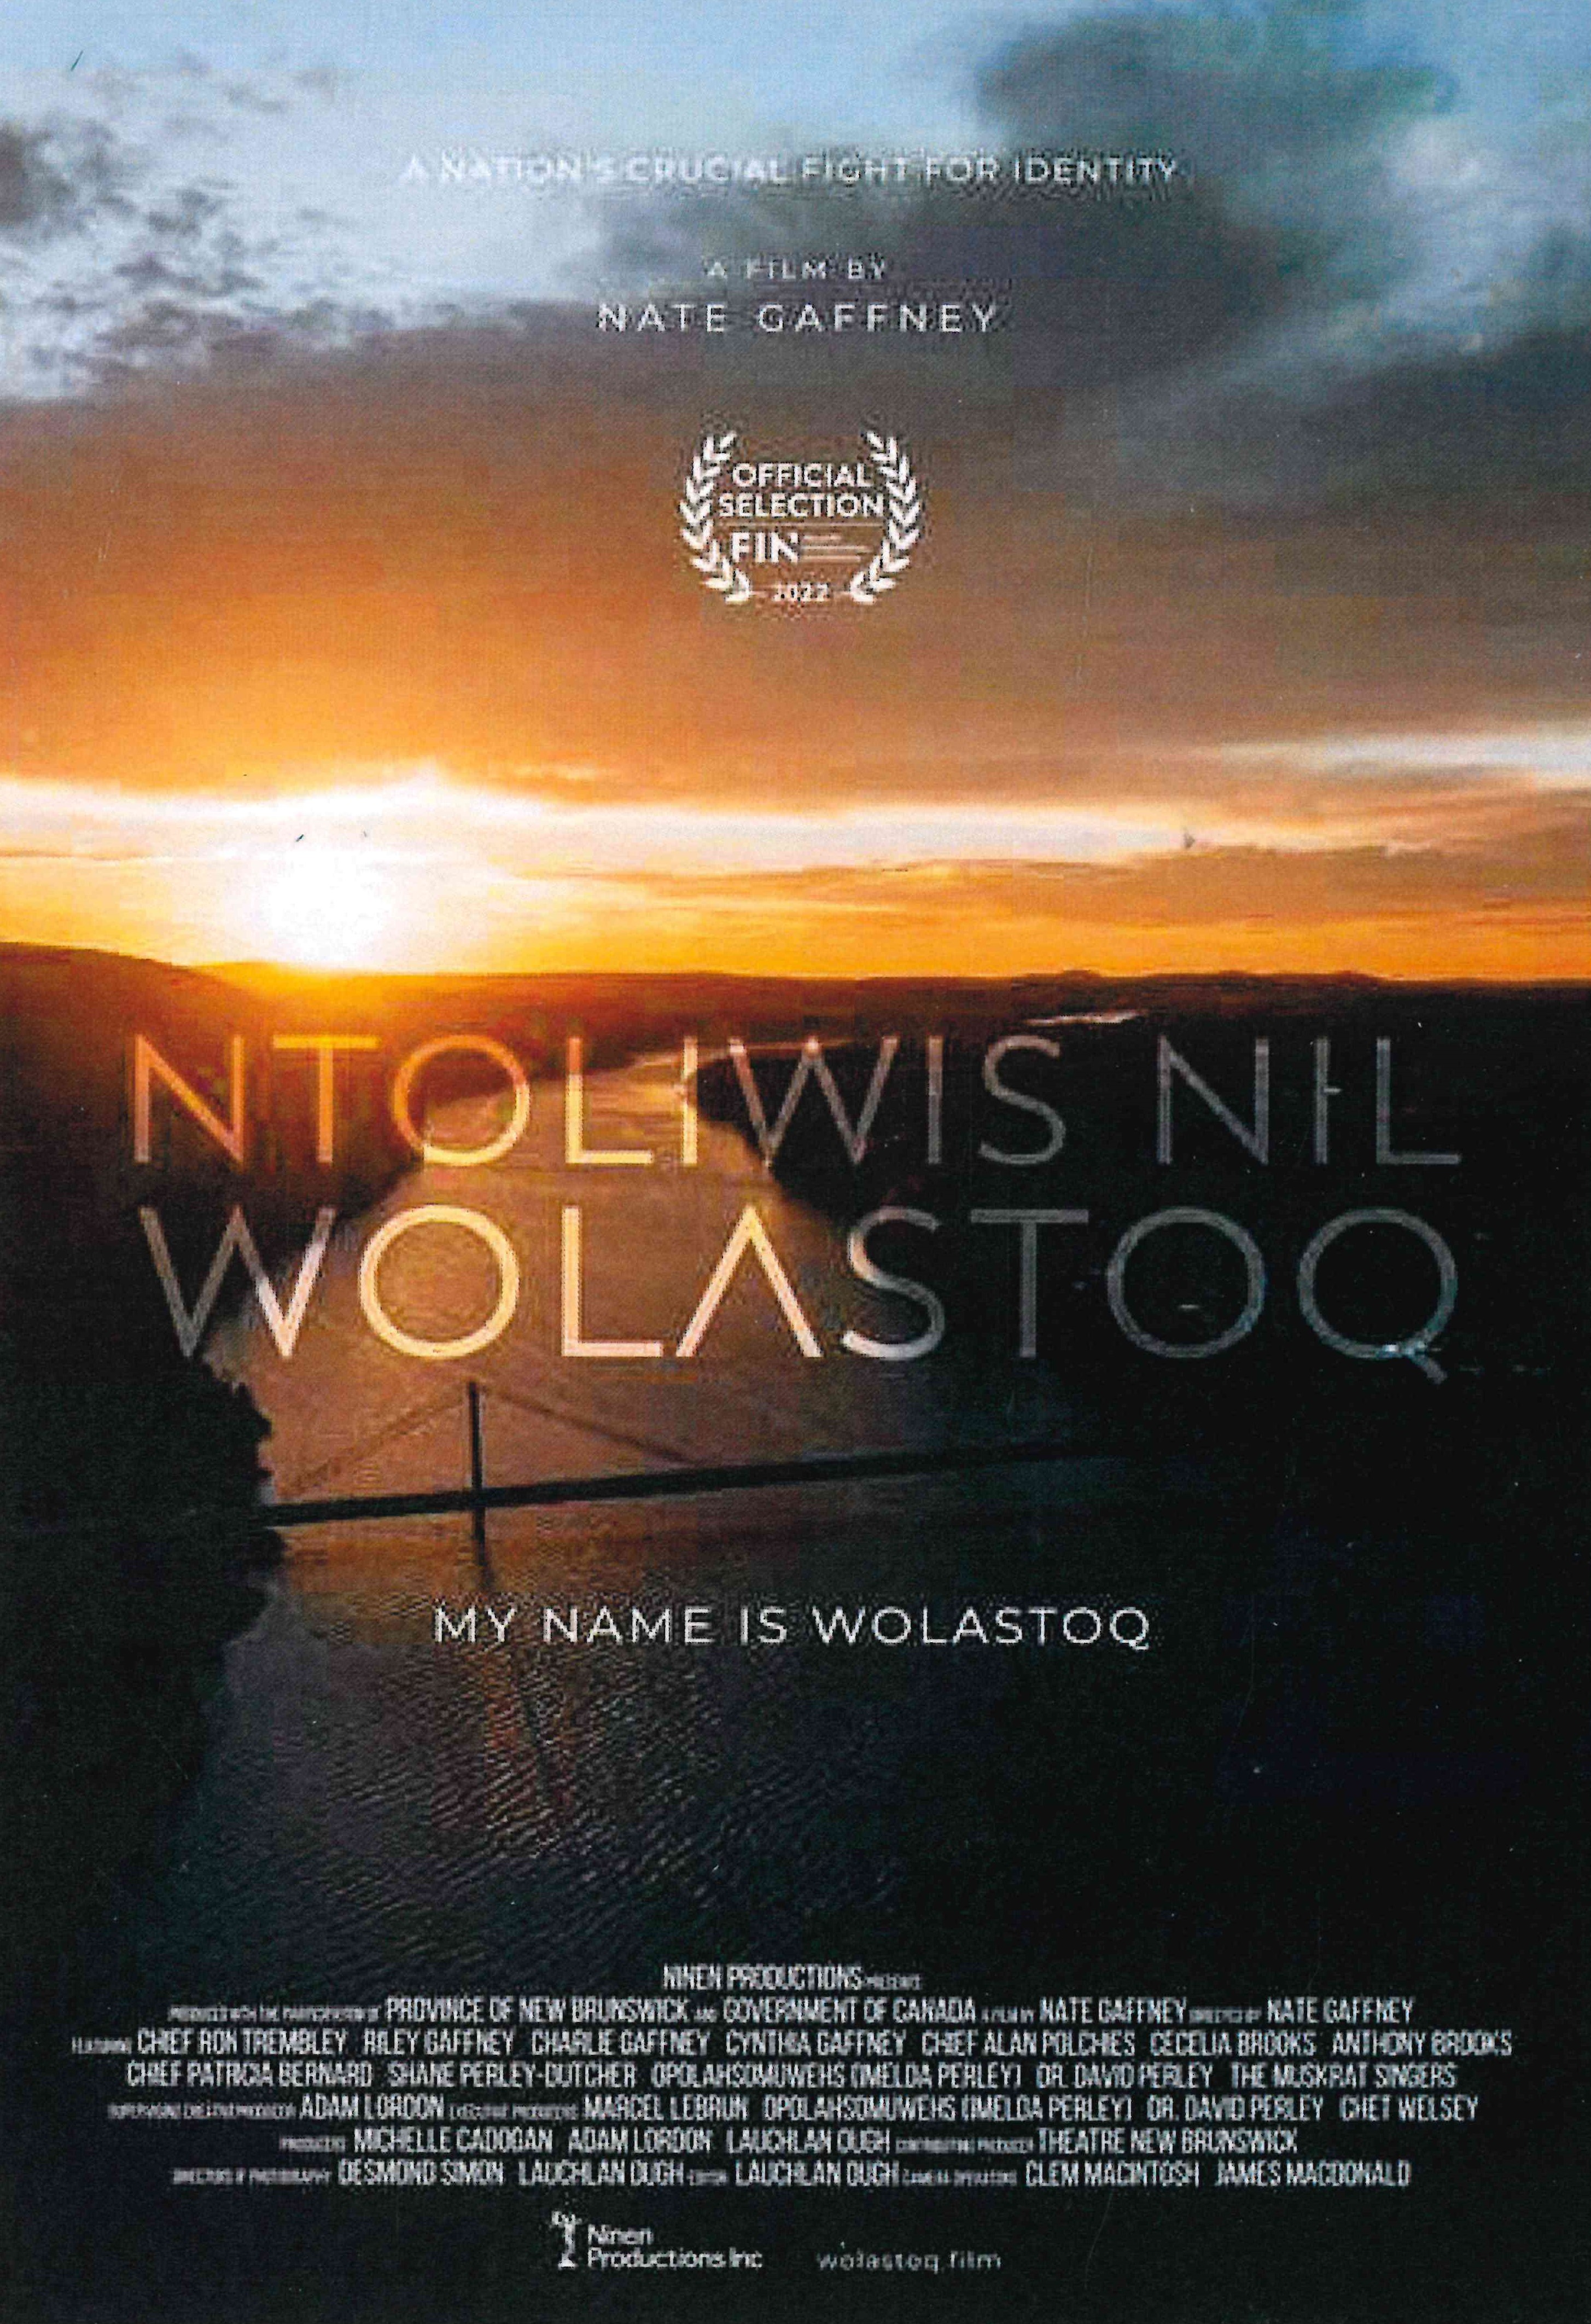 My Name Is Wolastoq